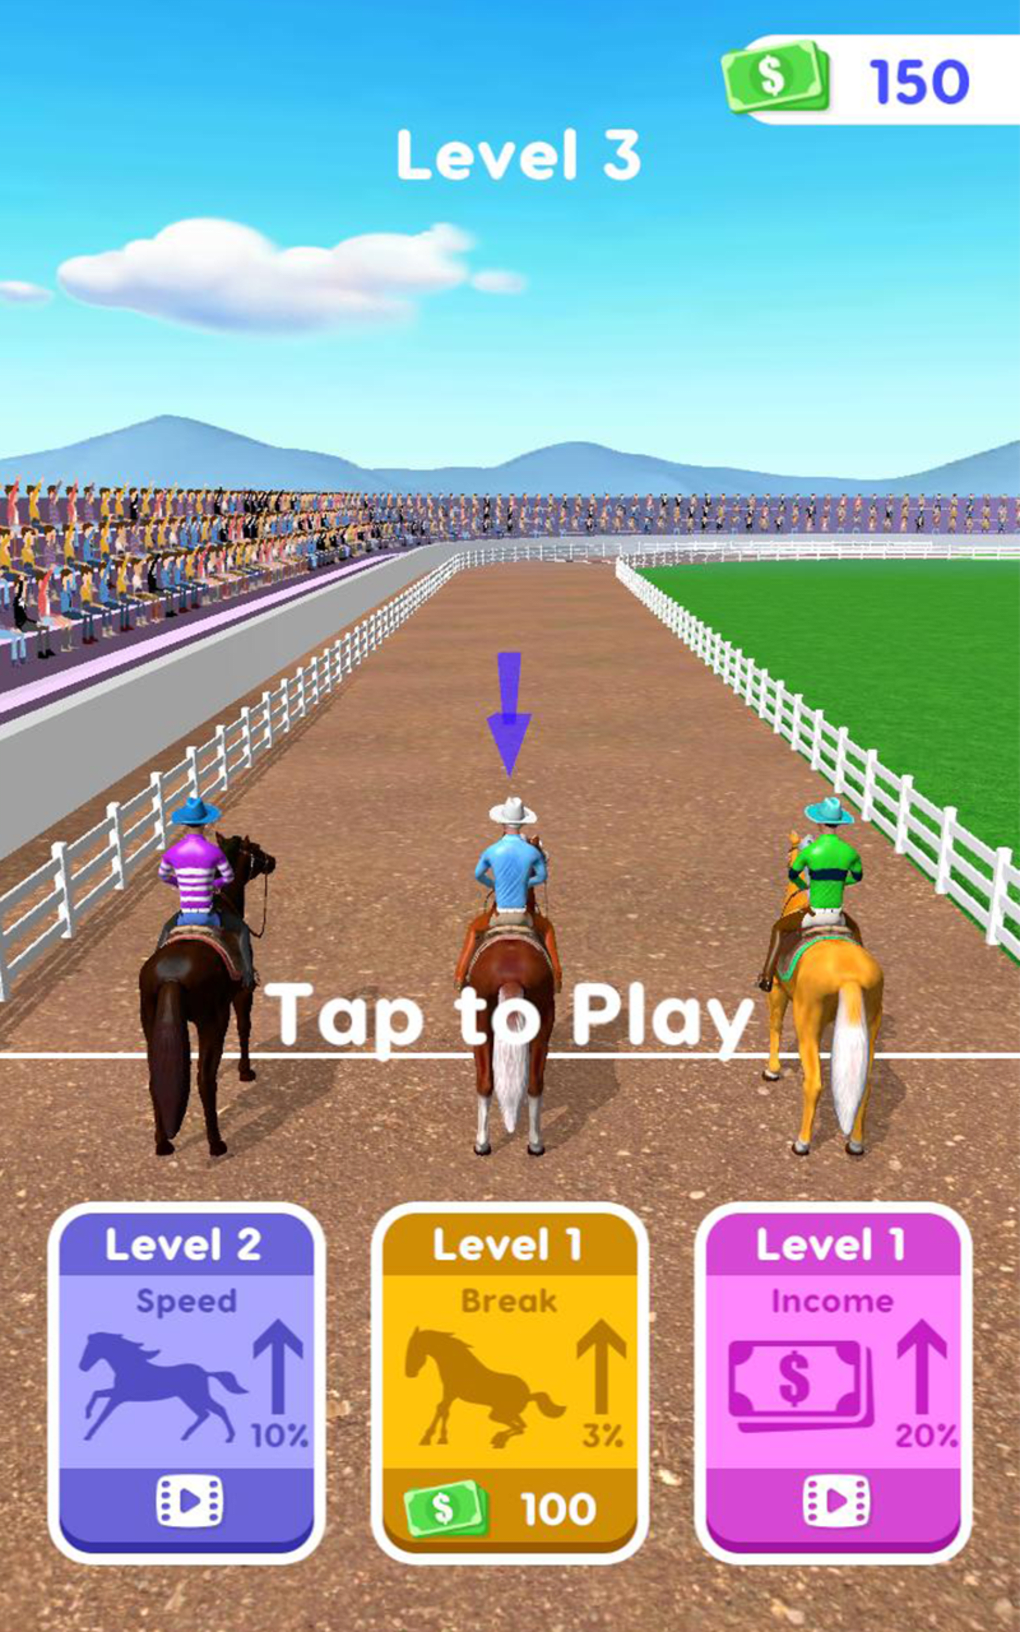 About: Race Master 3D (Google Play version)